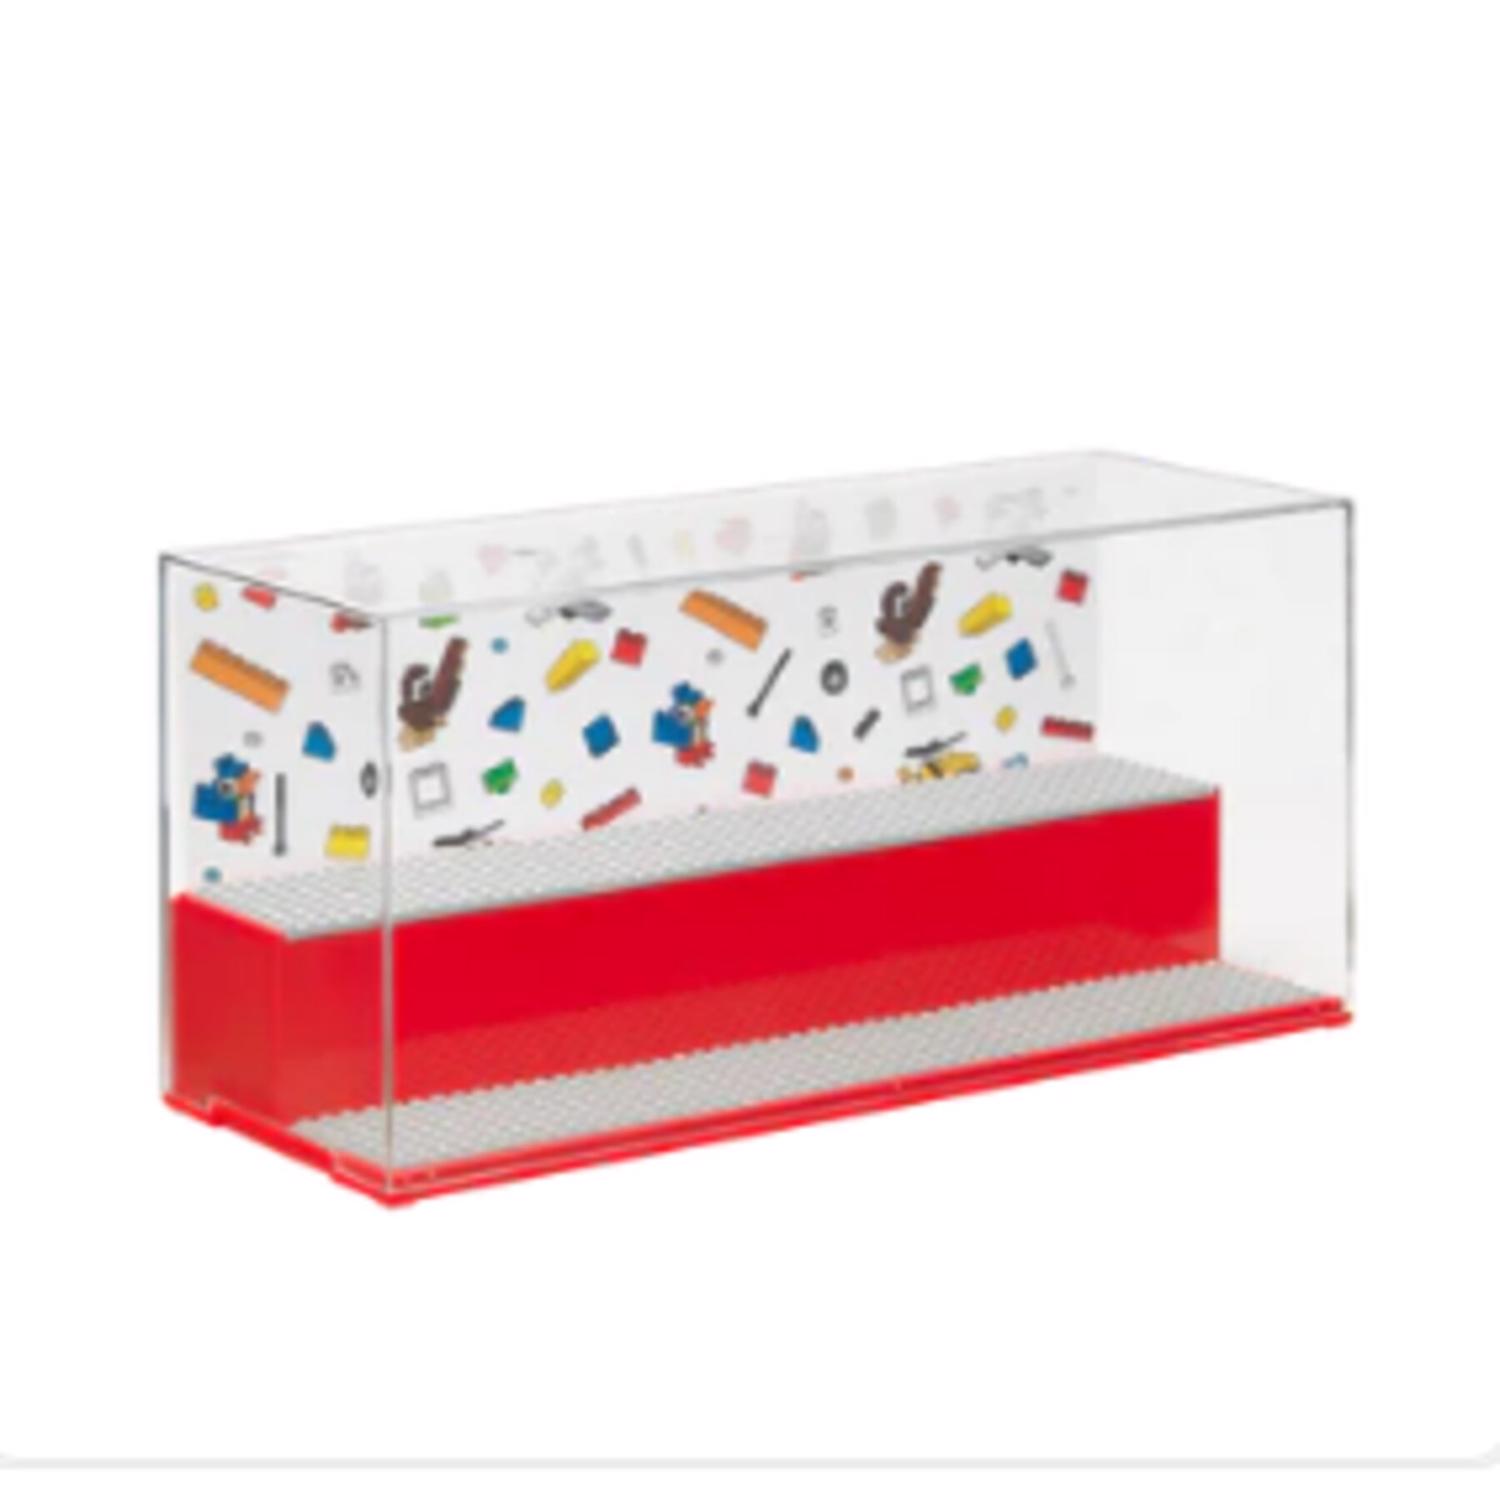 Photos - Other interior and decor Lego Play & Display Case Plastic Red 40700001 